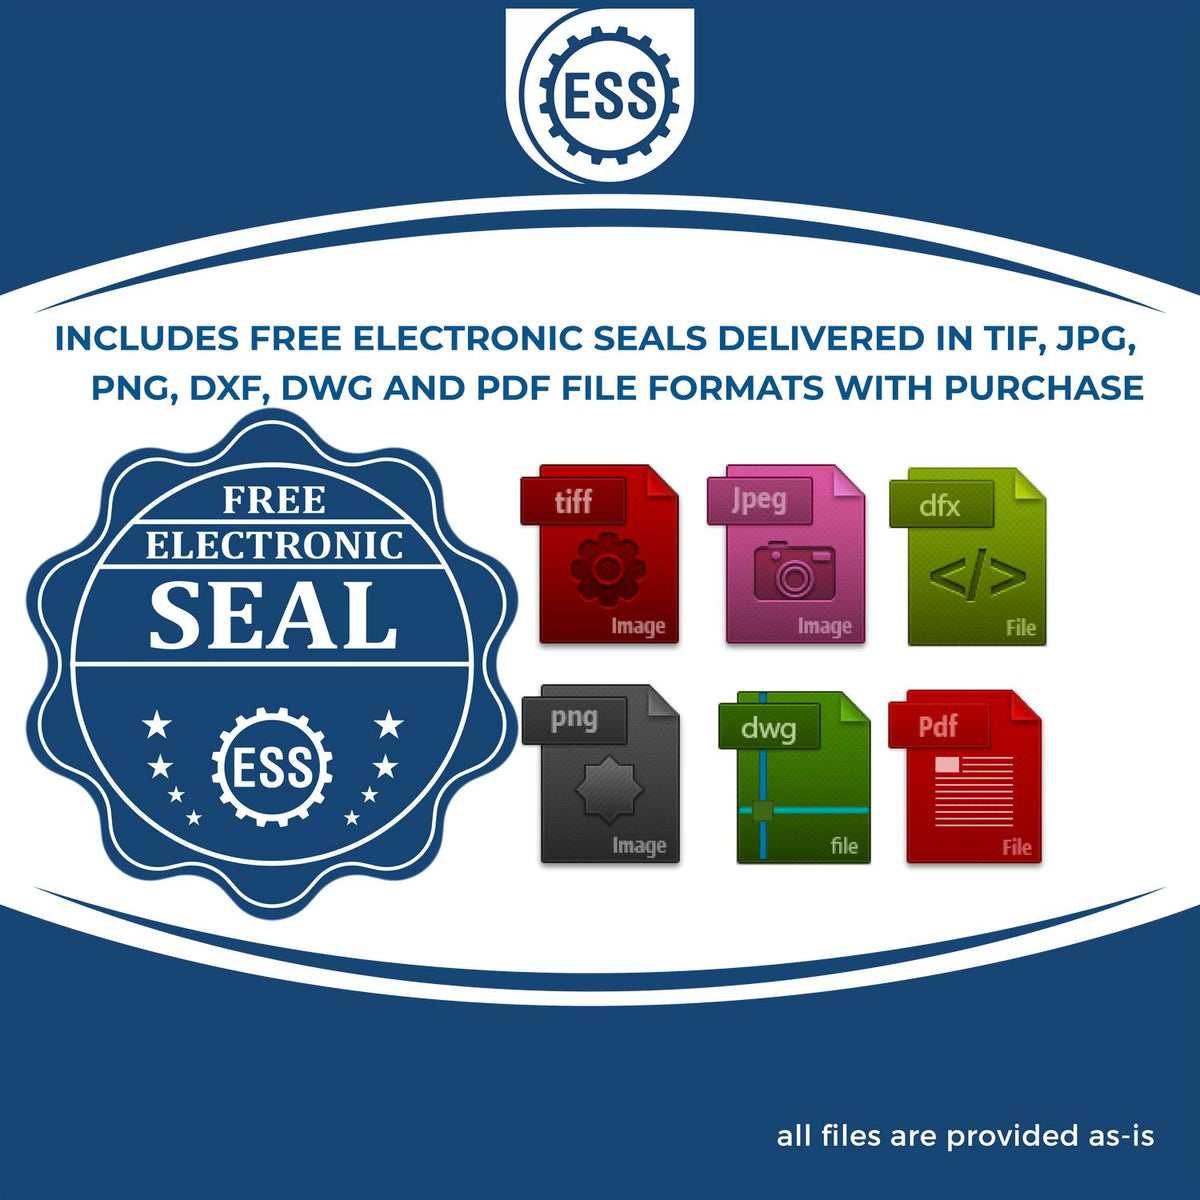 An infographic for the free electronic seal for the Slim Pre-Inked Utah Land Surveyor Seal Stamp illustrating the different file type icons such as DXF, DWG, TIF, JPG and PNG.